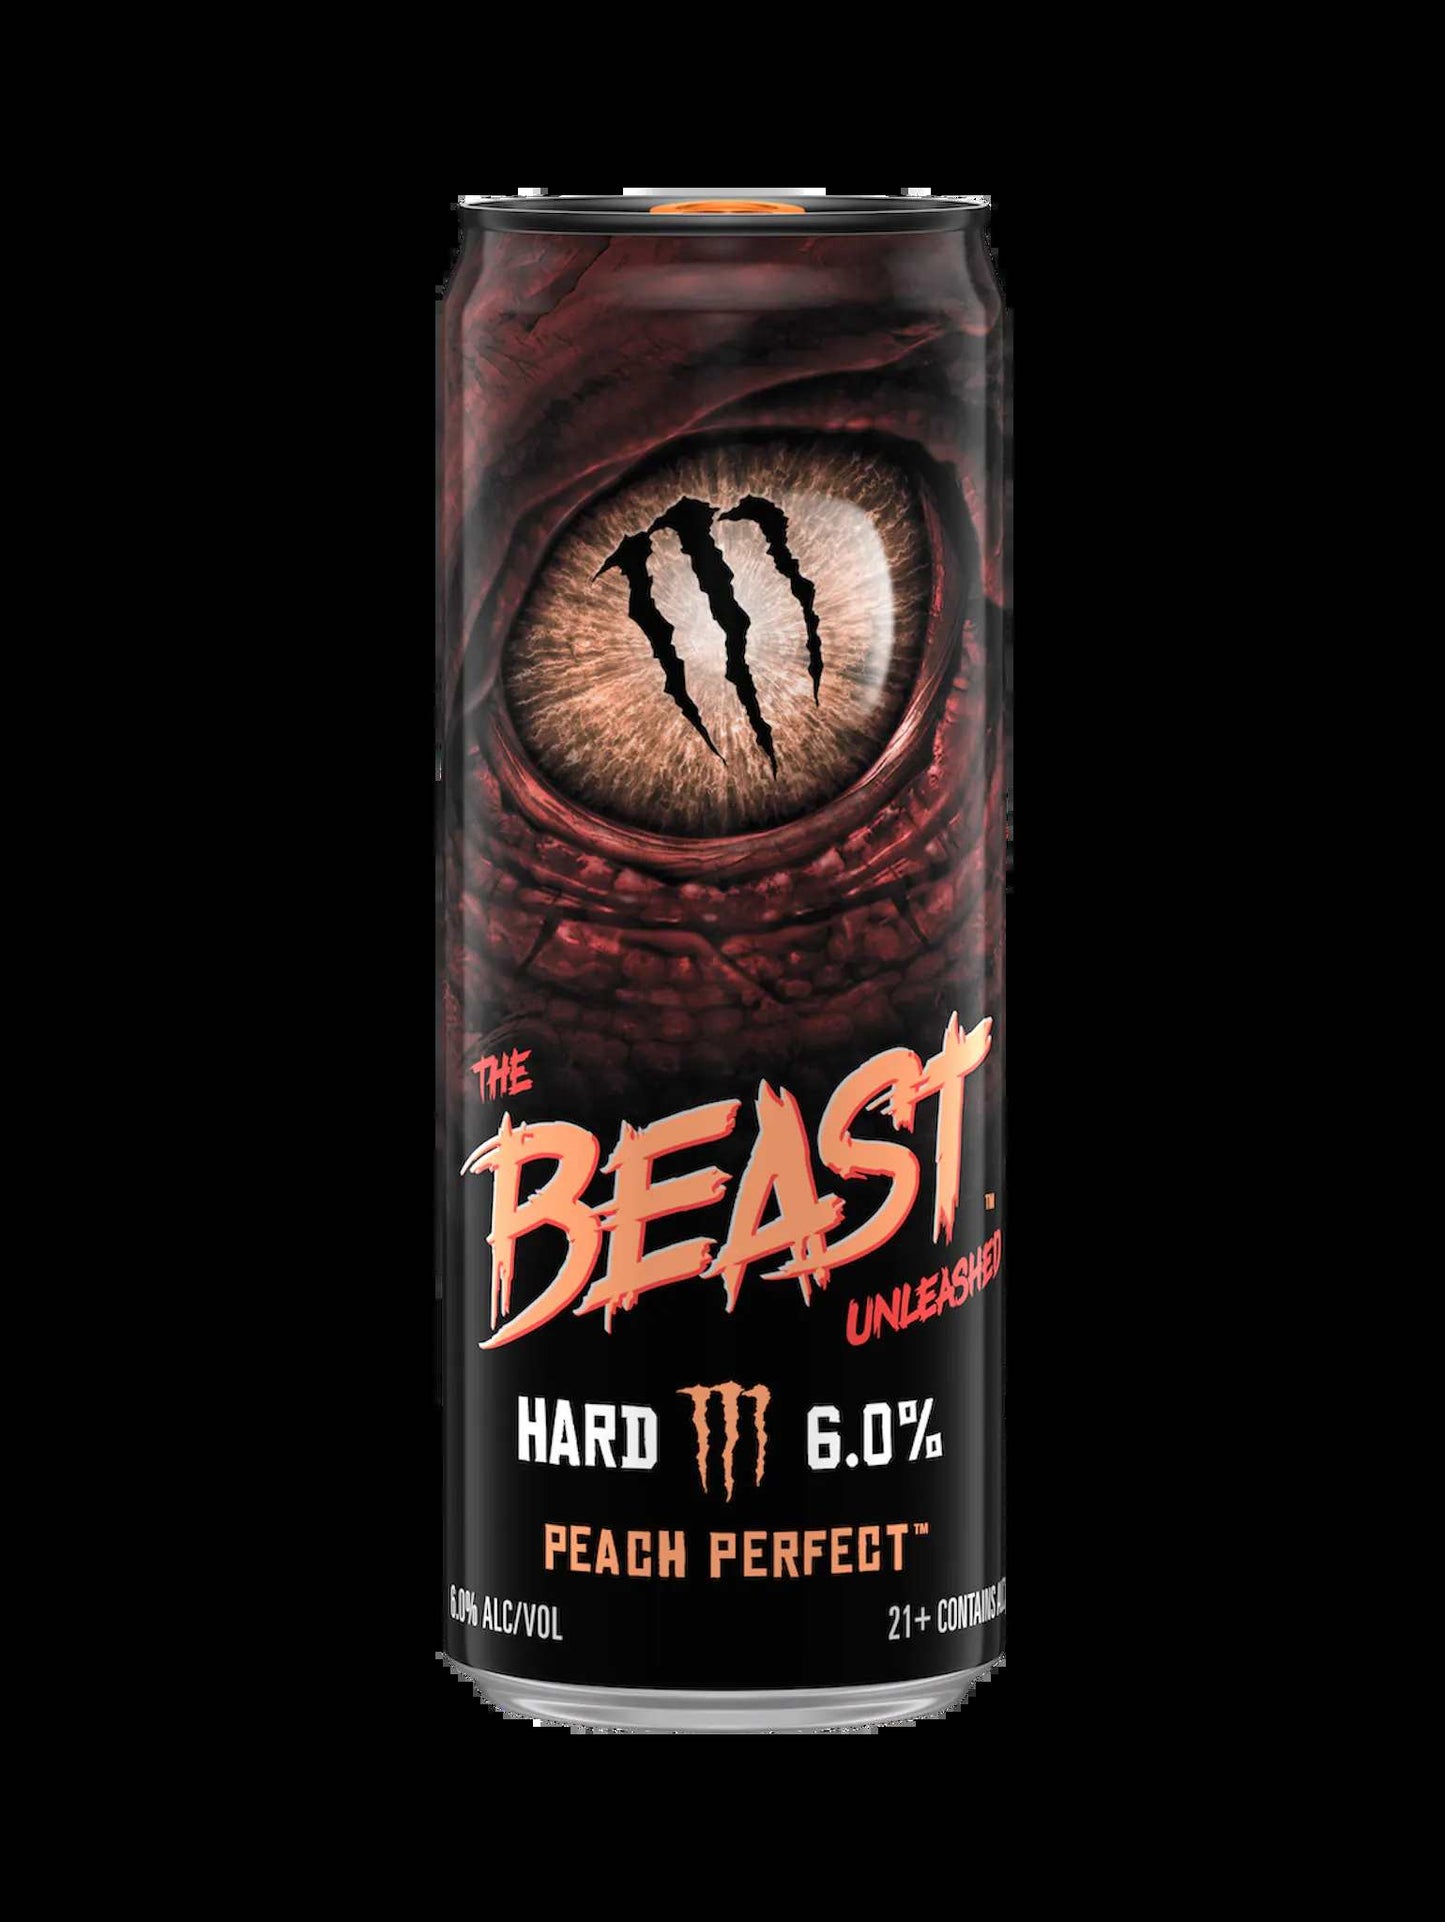 Monster The Beast Unleashed Peach Perfect 355ml FULL ( lattine con ammaccature ) beast beast unleashed beast24 hard tea monster monster energy nasty nasty beast not-on-sale unleashed usa